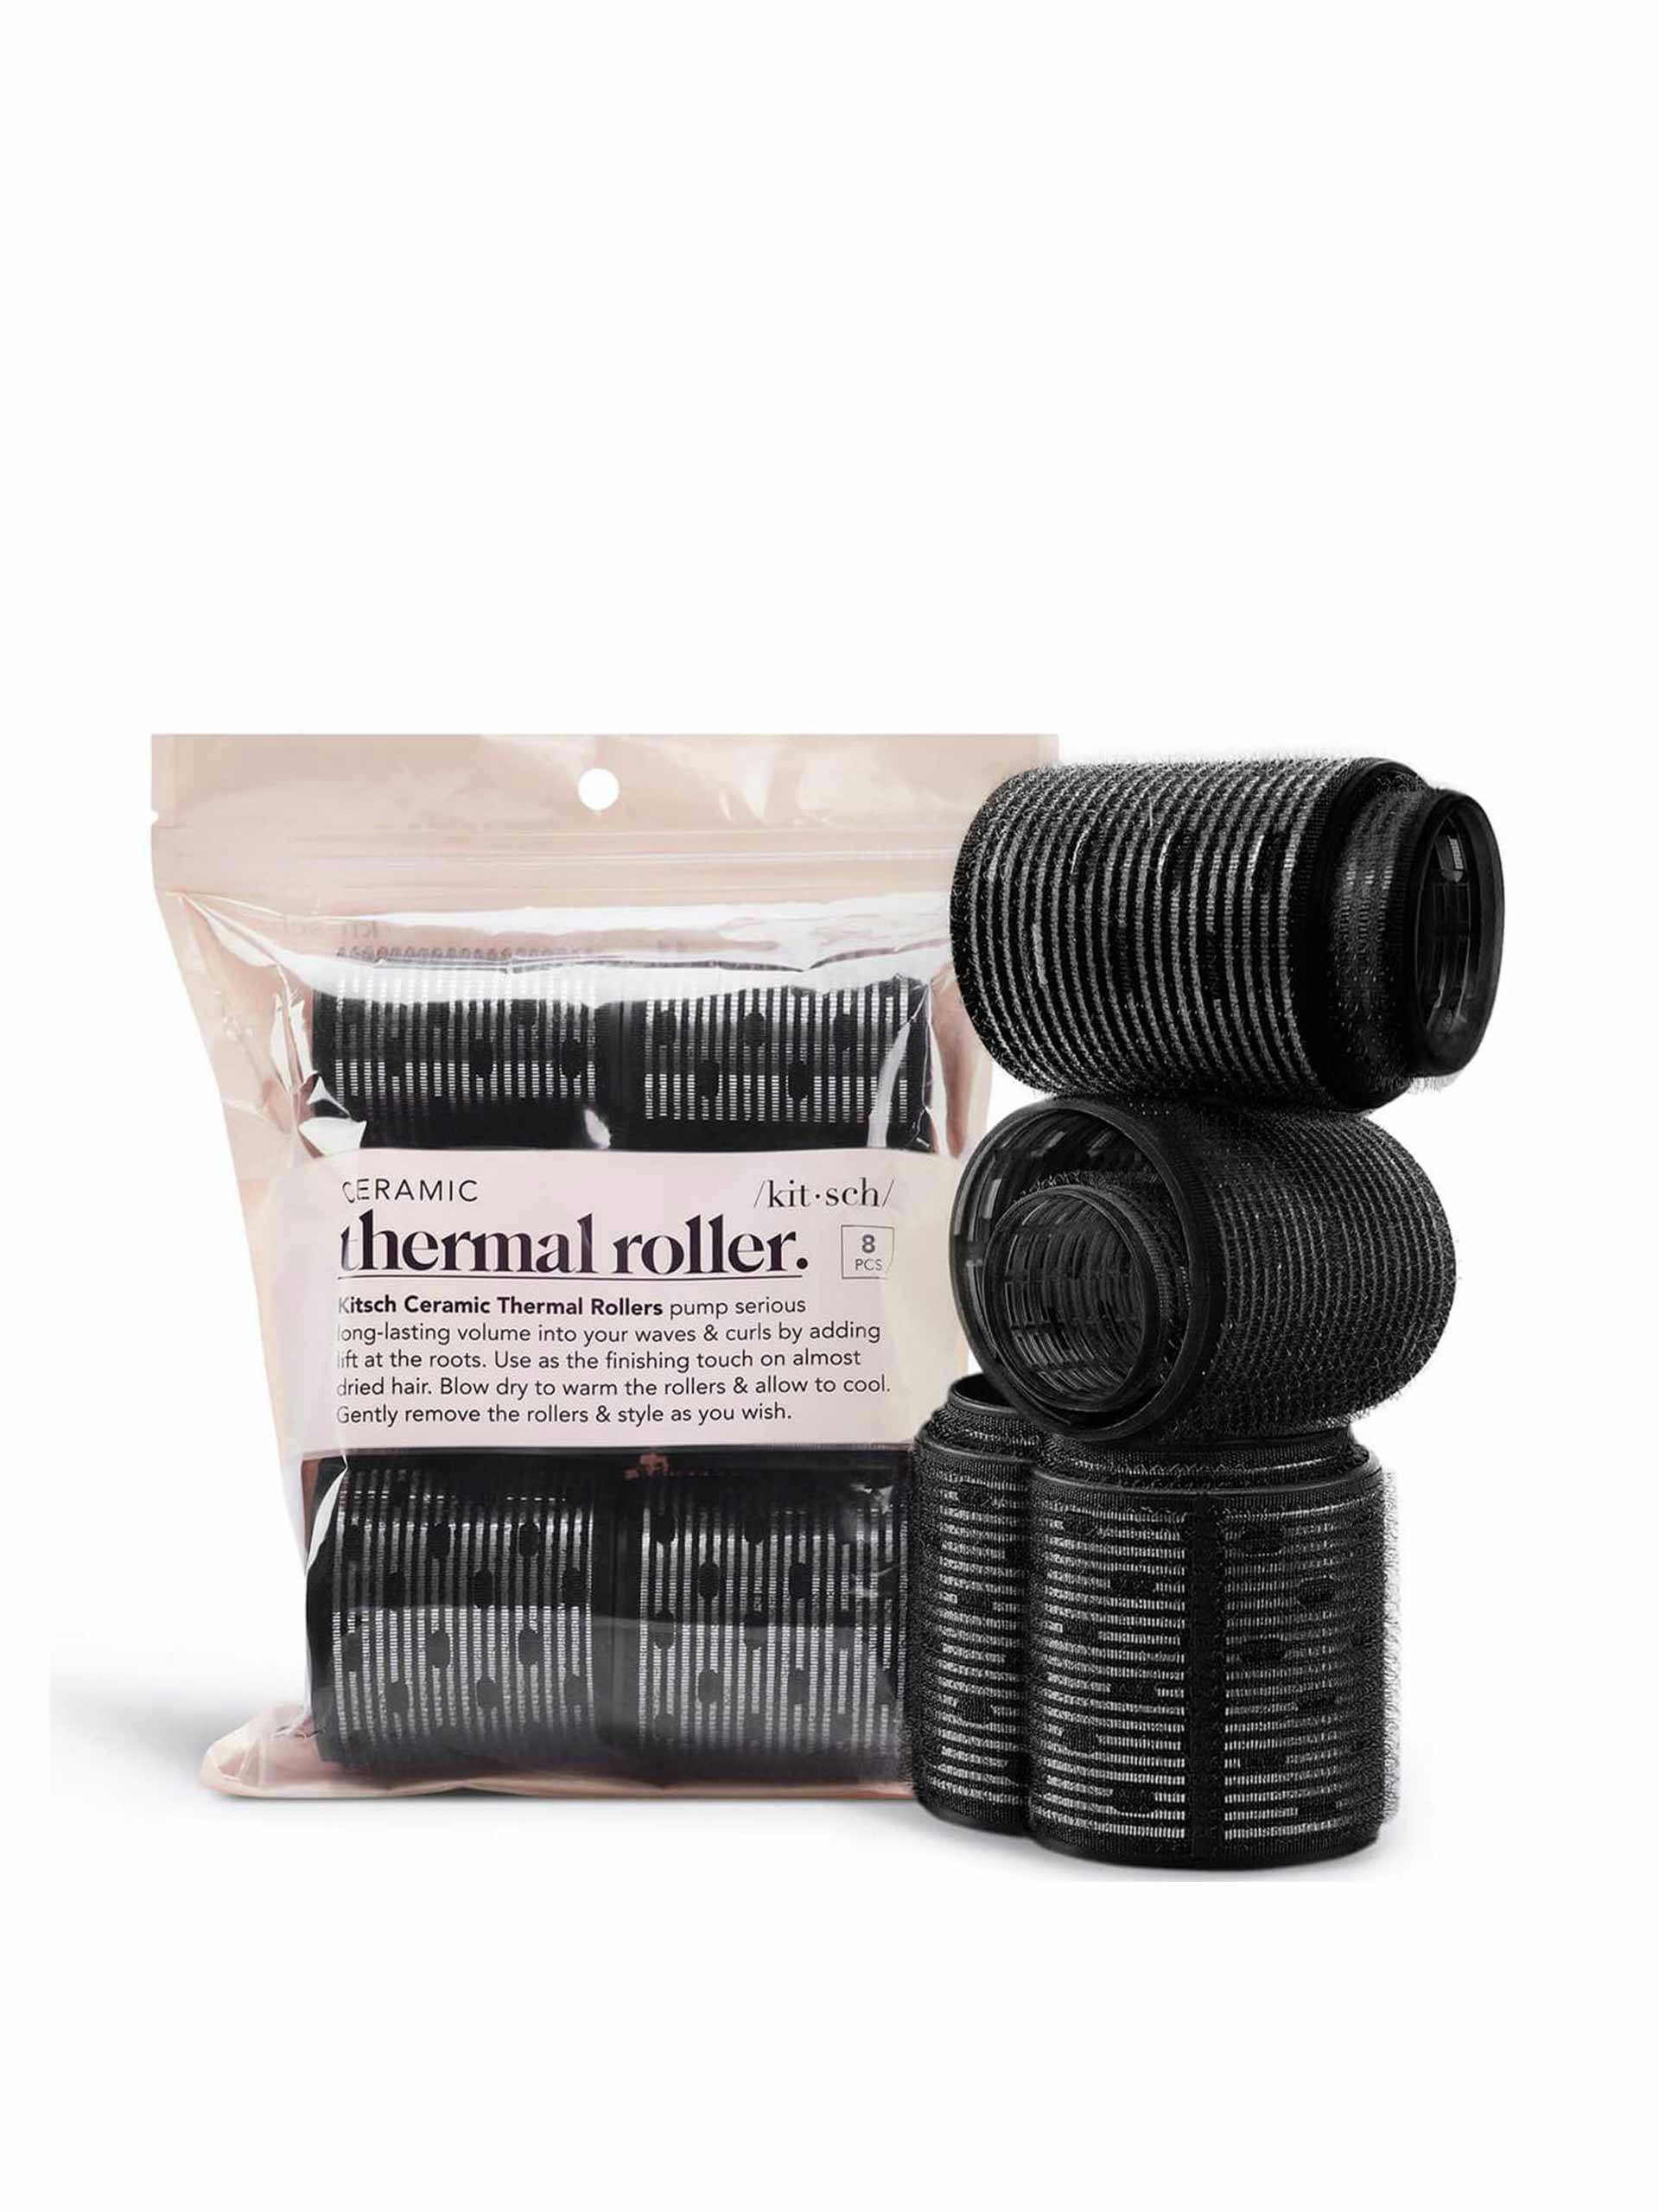 Kitsch ceramic thermal rollers